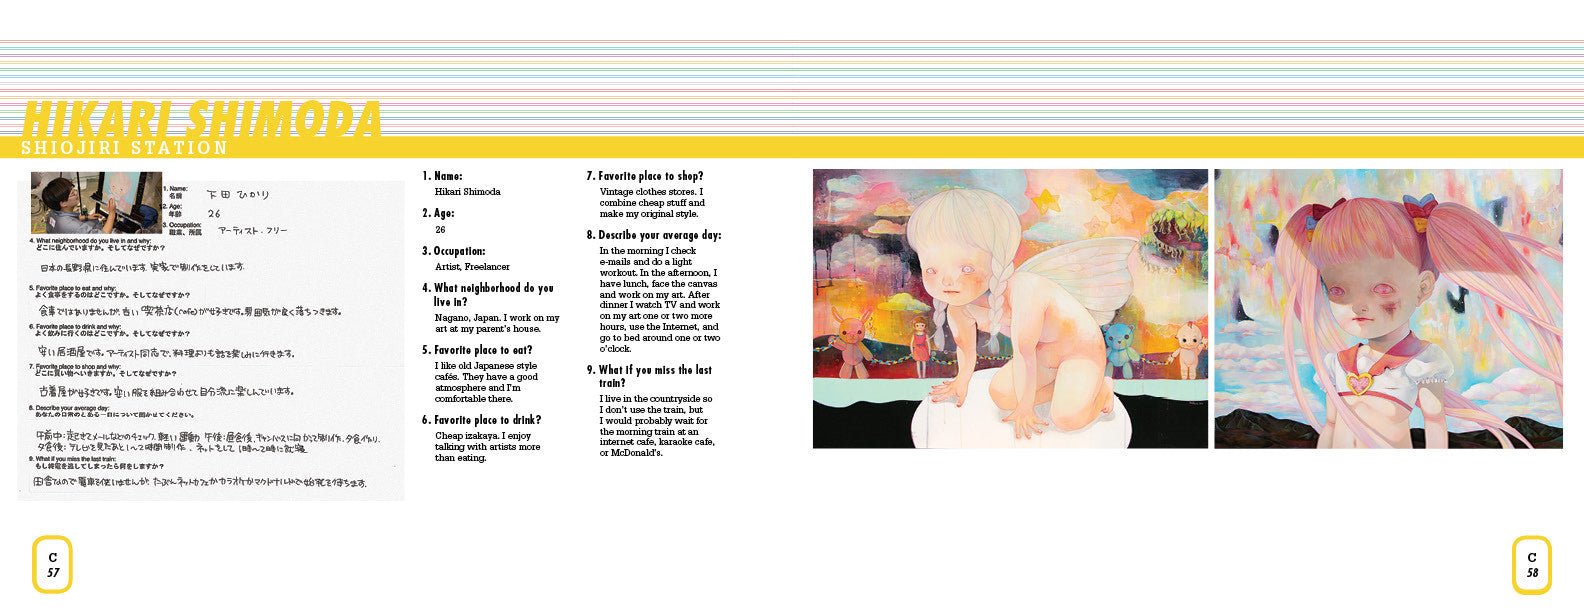 Hikari Shimoda's art and her handwritten questionnaire featured in The Tall Trees of Tokyo by Matt Wagner